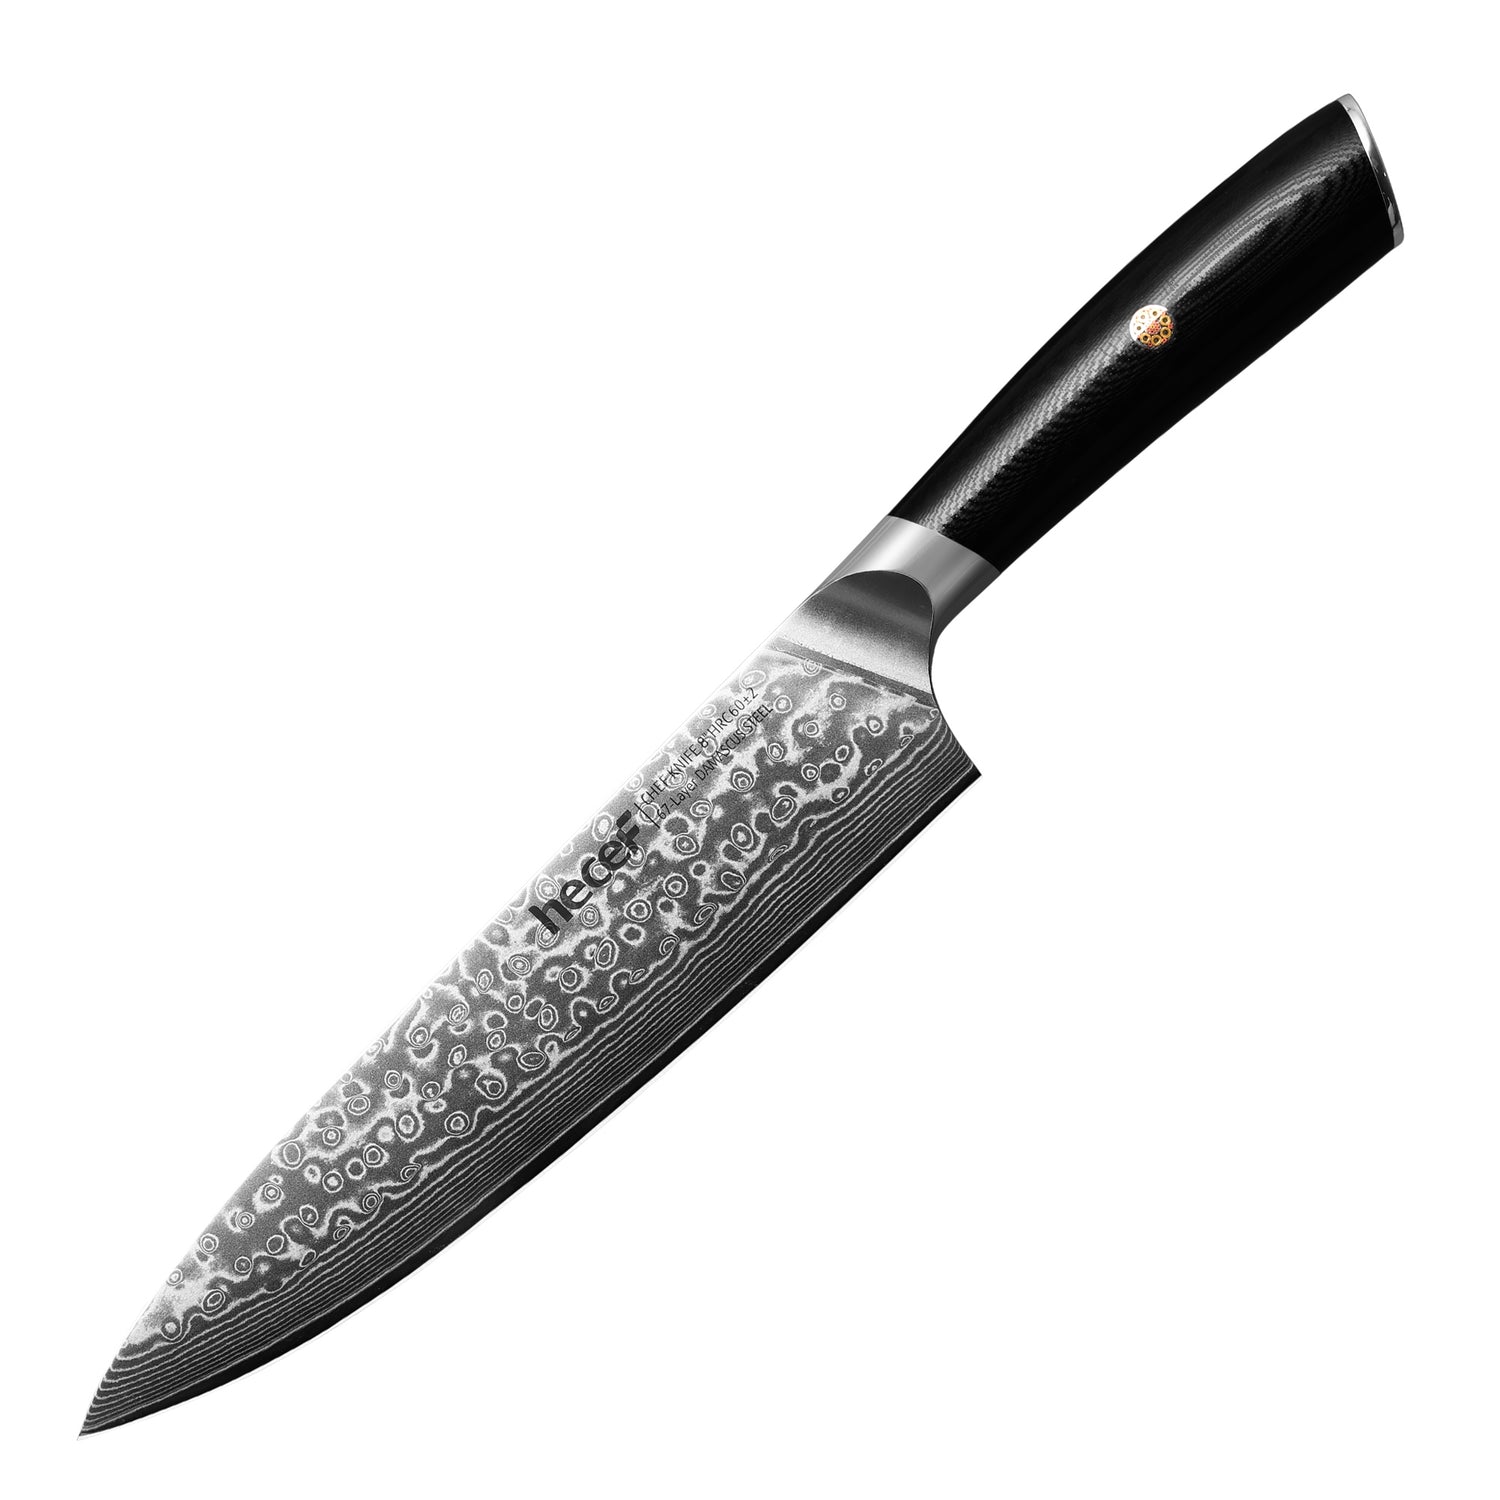 Hecef Japanese Damascus Chef Knife 8 inch/ 20 cm Razor Sharp Professional Chef Cooking Knife 67 Layers Damascus VG10 Steel - Hecef Kitchen